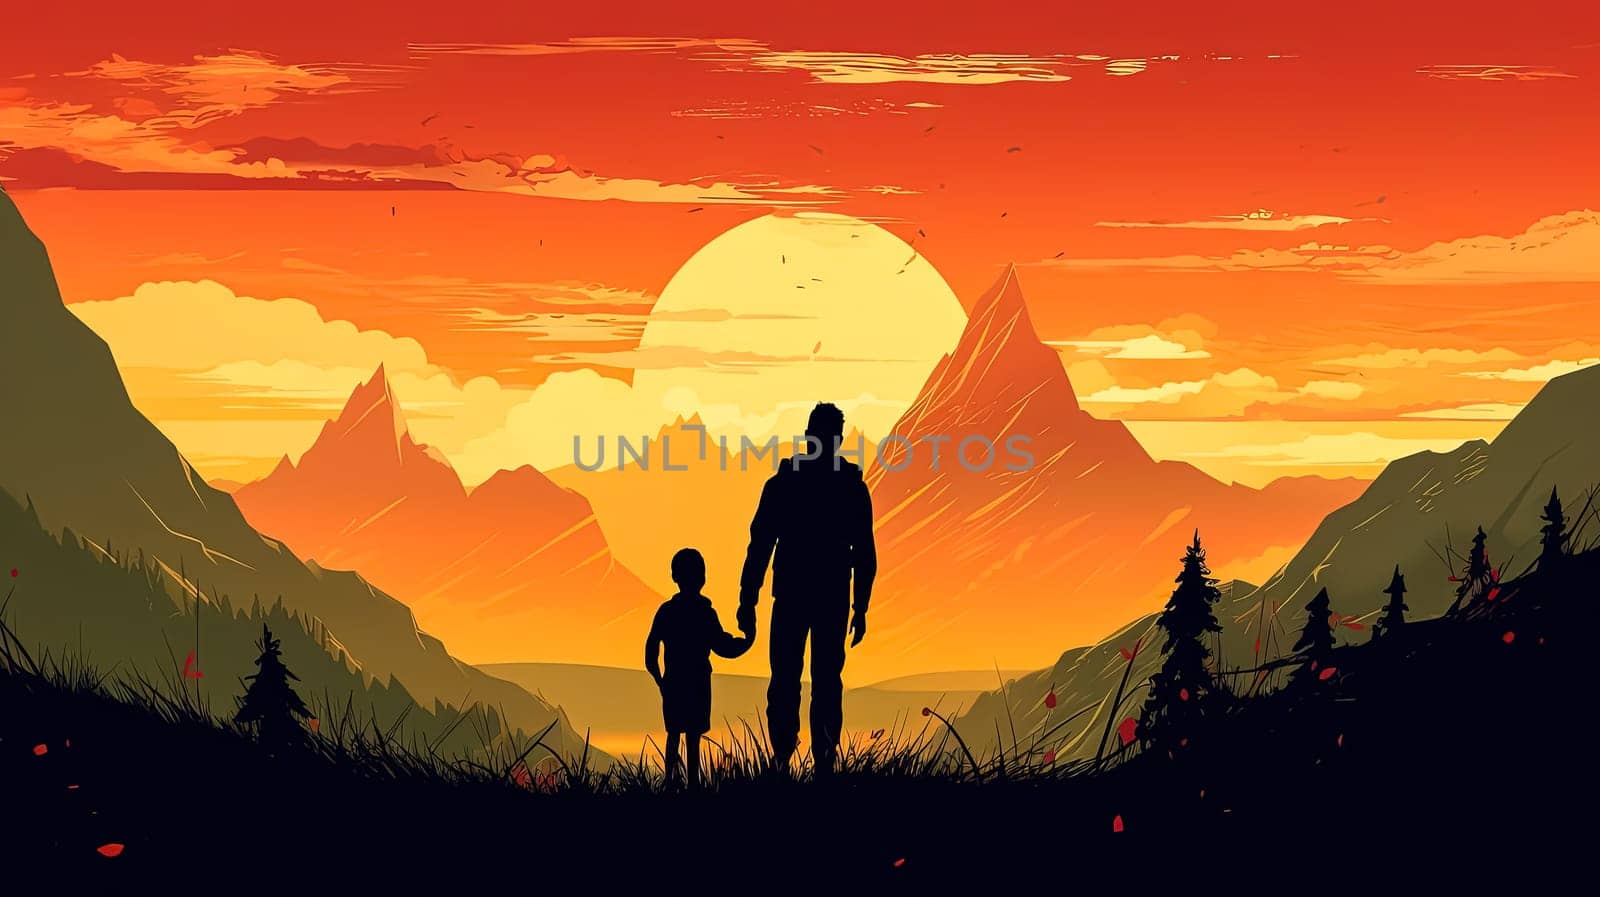 Embark on a heartwarming journey with an illustration of a father holding his childs hand against a mountainous backdrop. A touching Fathers Day concept full of love and adventure.